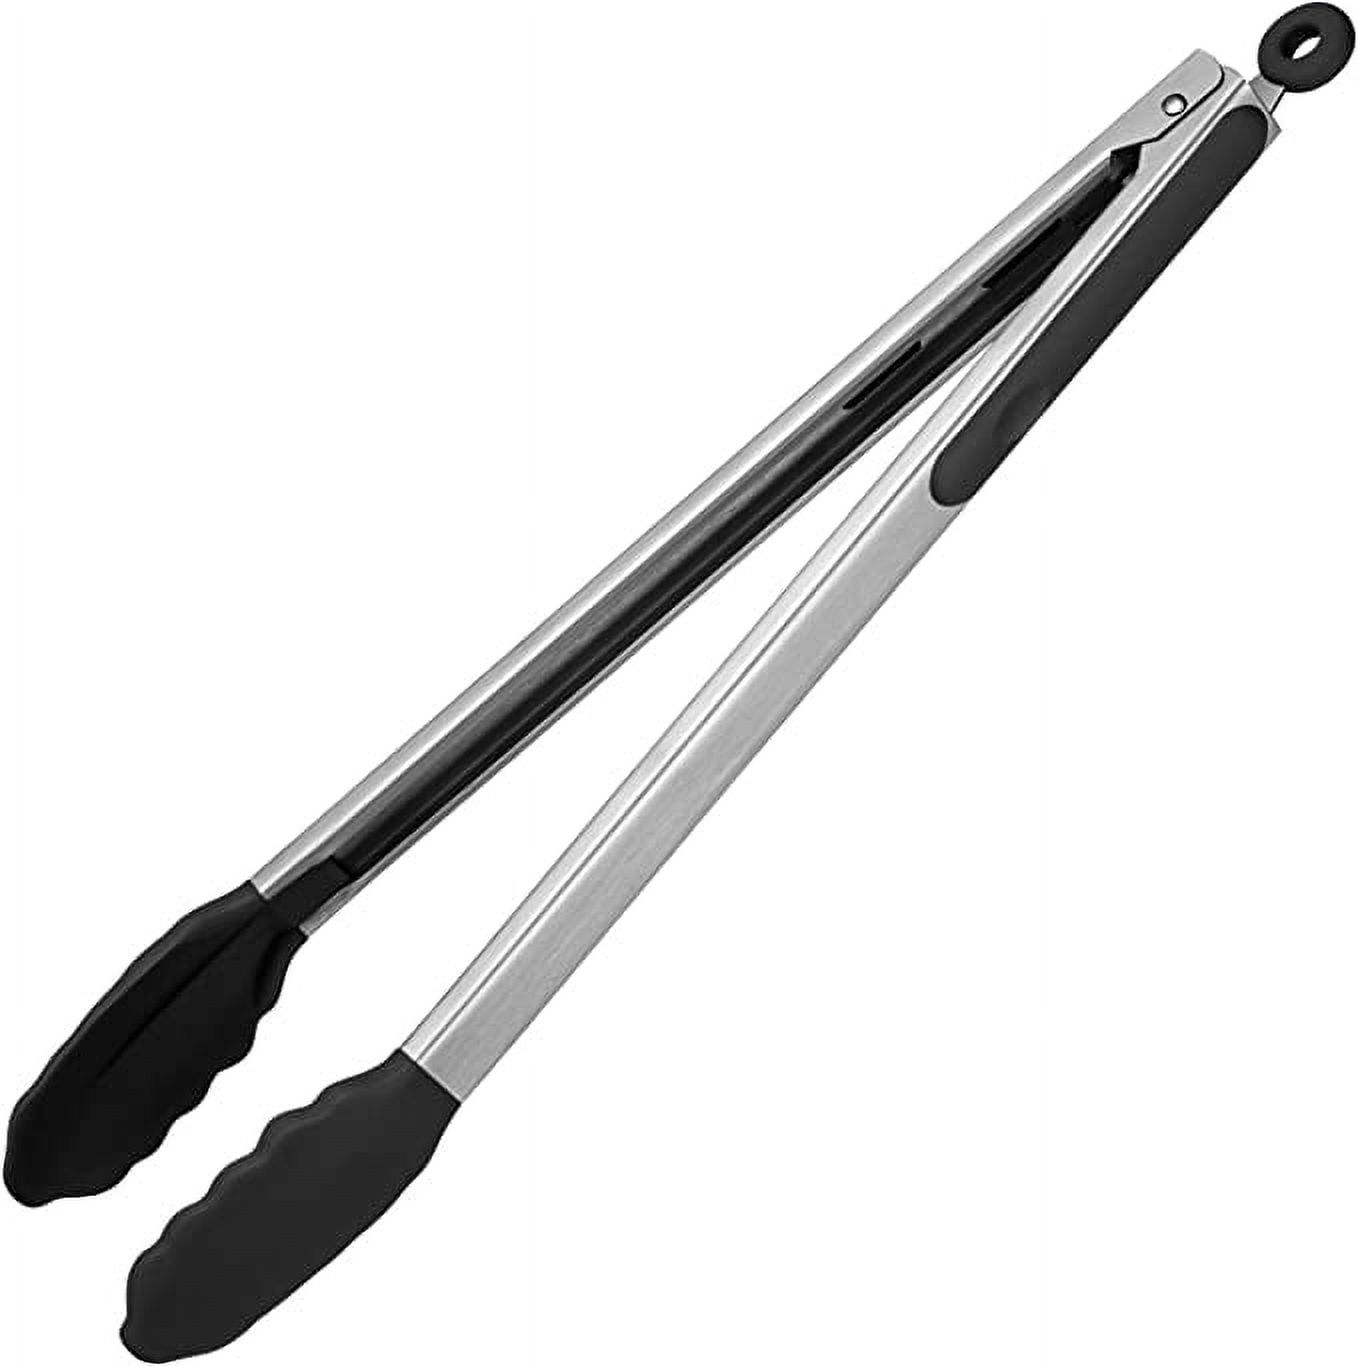 12-Inch Silicone Tip Locking Tong by Tezzorio, Utility Tongs with Black  Silicone Tips and Grips, Durable Non-Slip and Non-Stick Cooking/Kitchen  Tongs